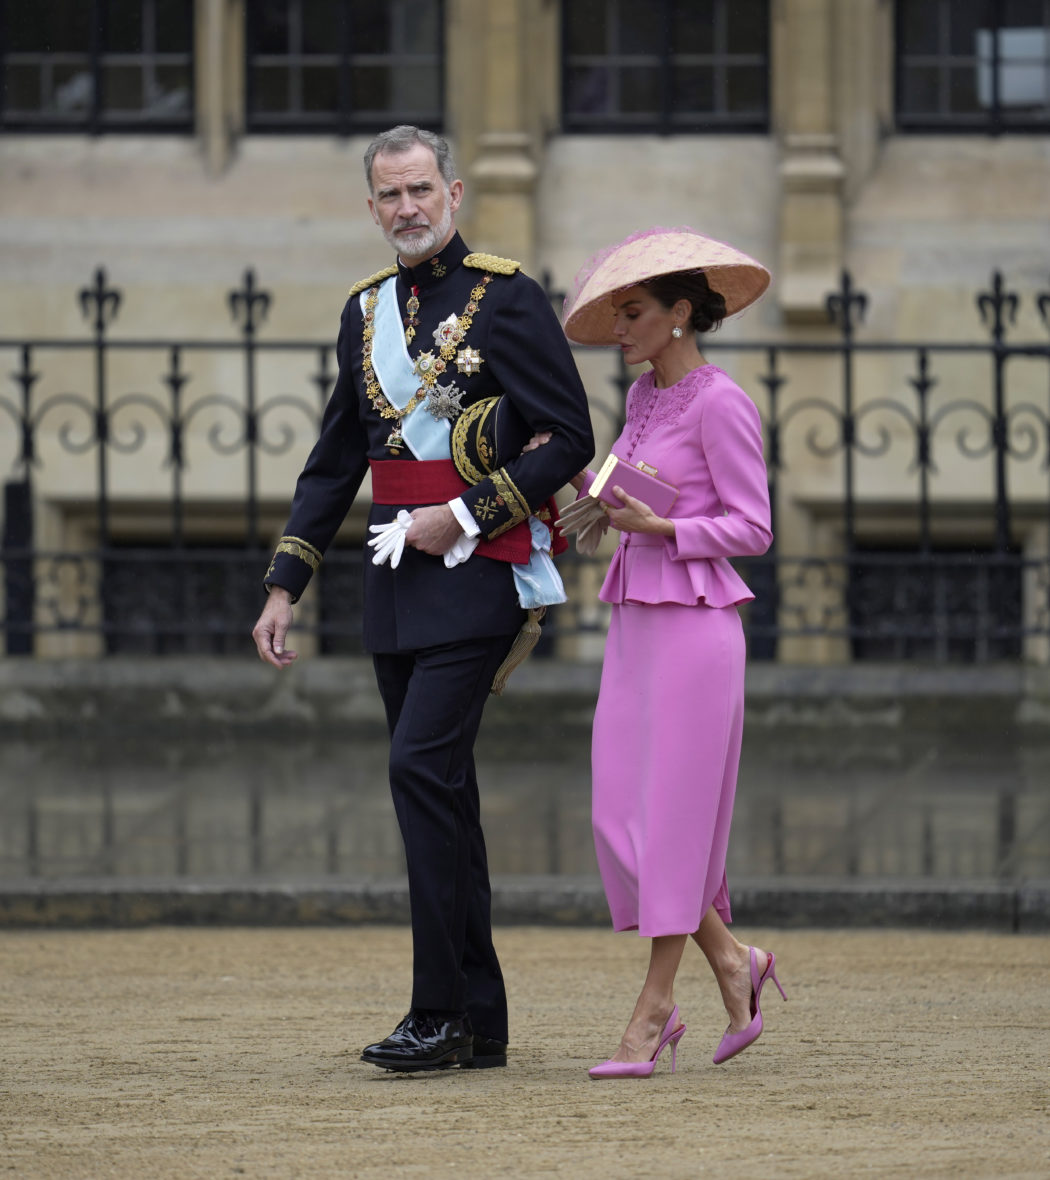 Spain’s Prince Felipe and Queen Letizia arrive ahead of the coronation of King Charles III and Camilla, the Queen Consort, in London, Saturday, May 6, 2023. (AP Photo/Kin Cheung)